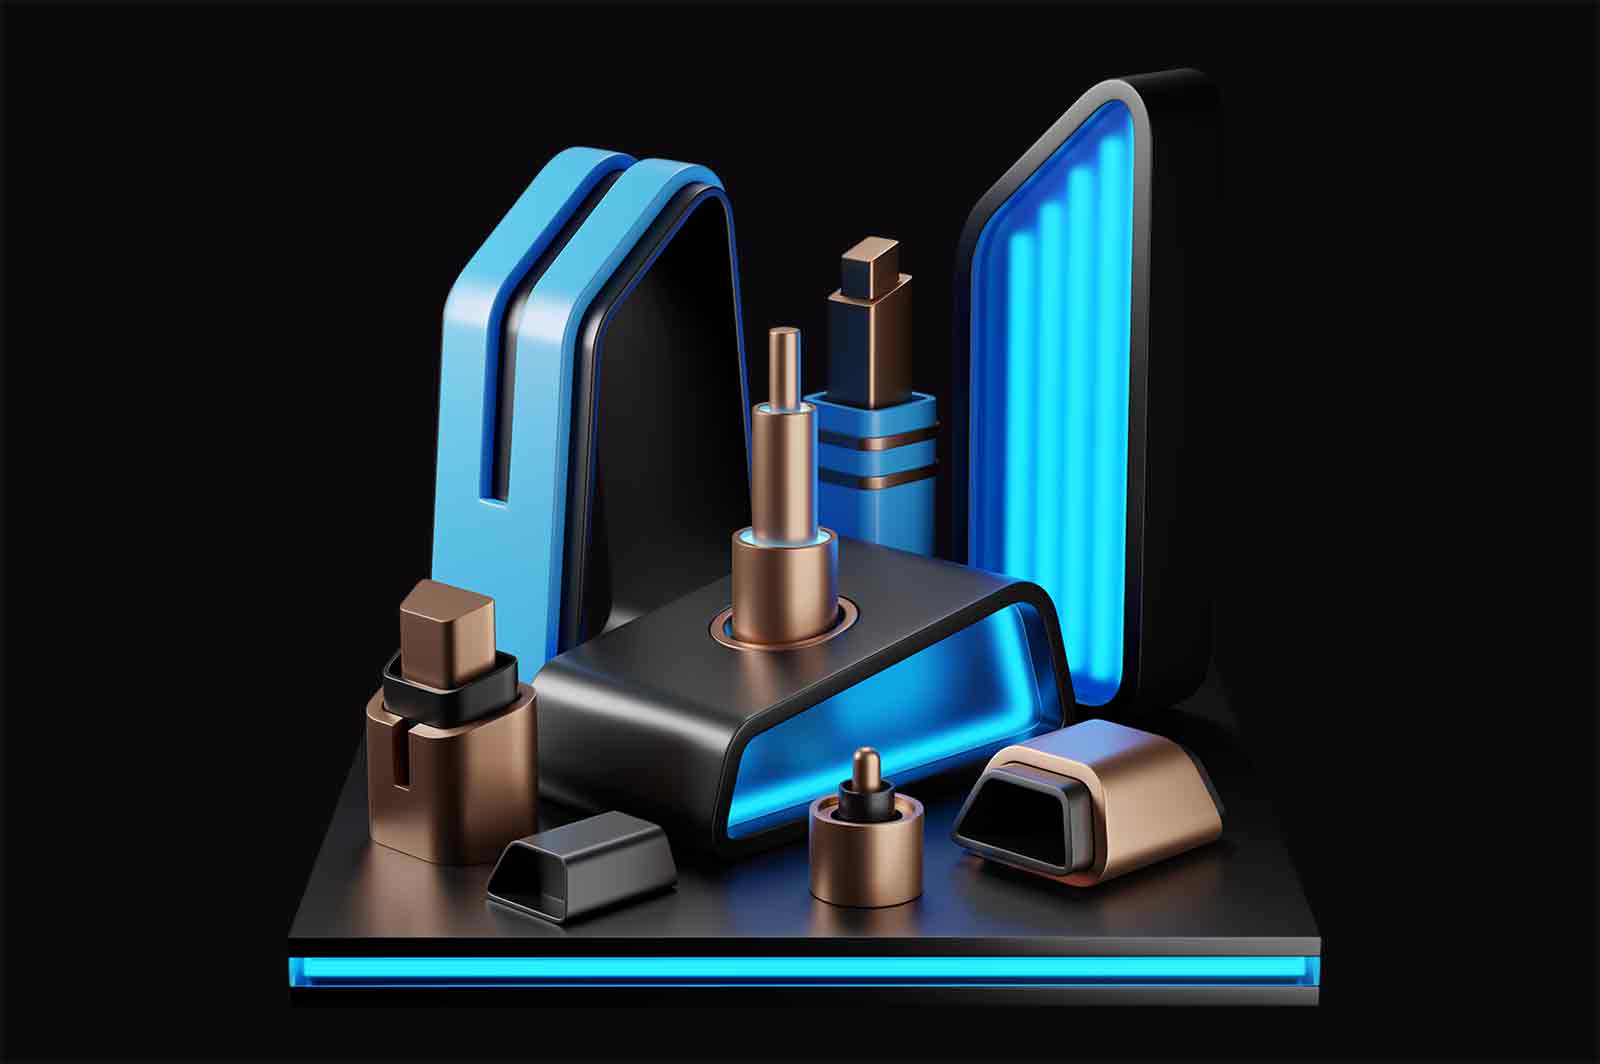 Abstract composition of backlit details on black stand 3d rendered illustration. Metal and plastic and glass components of single mechanism concept